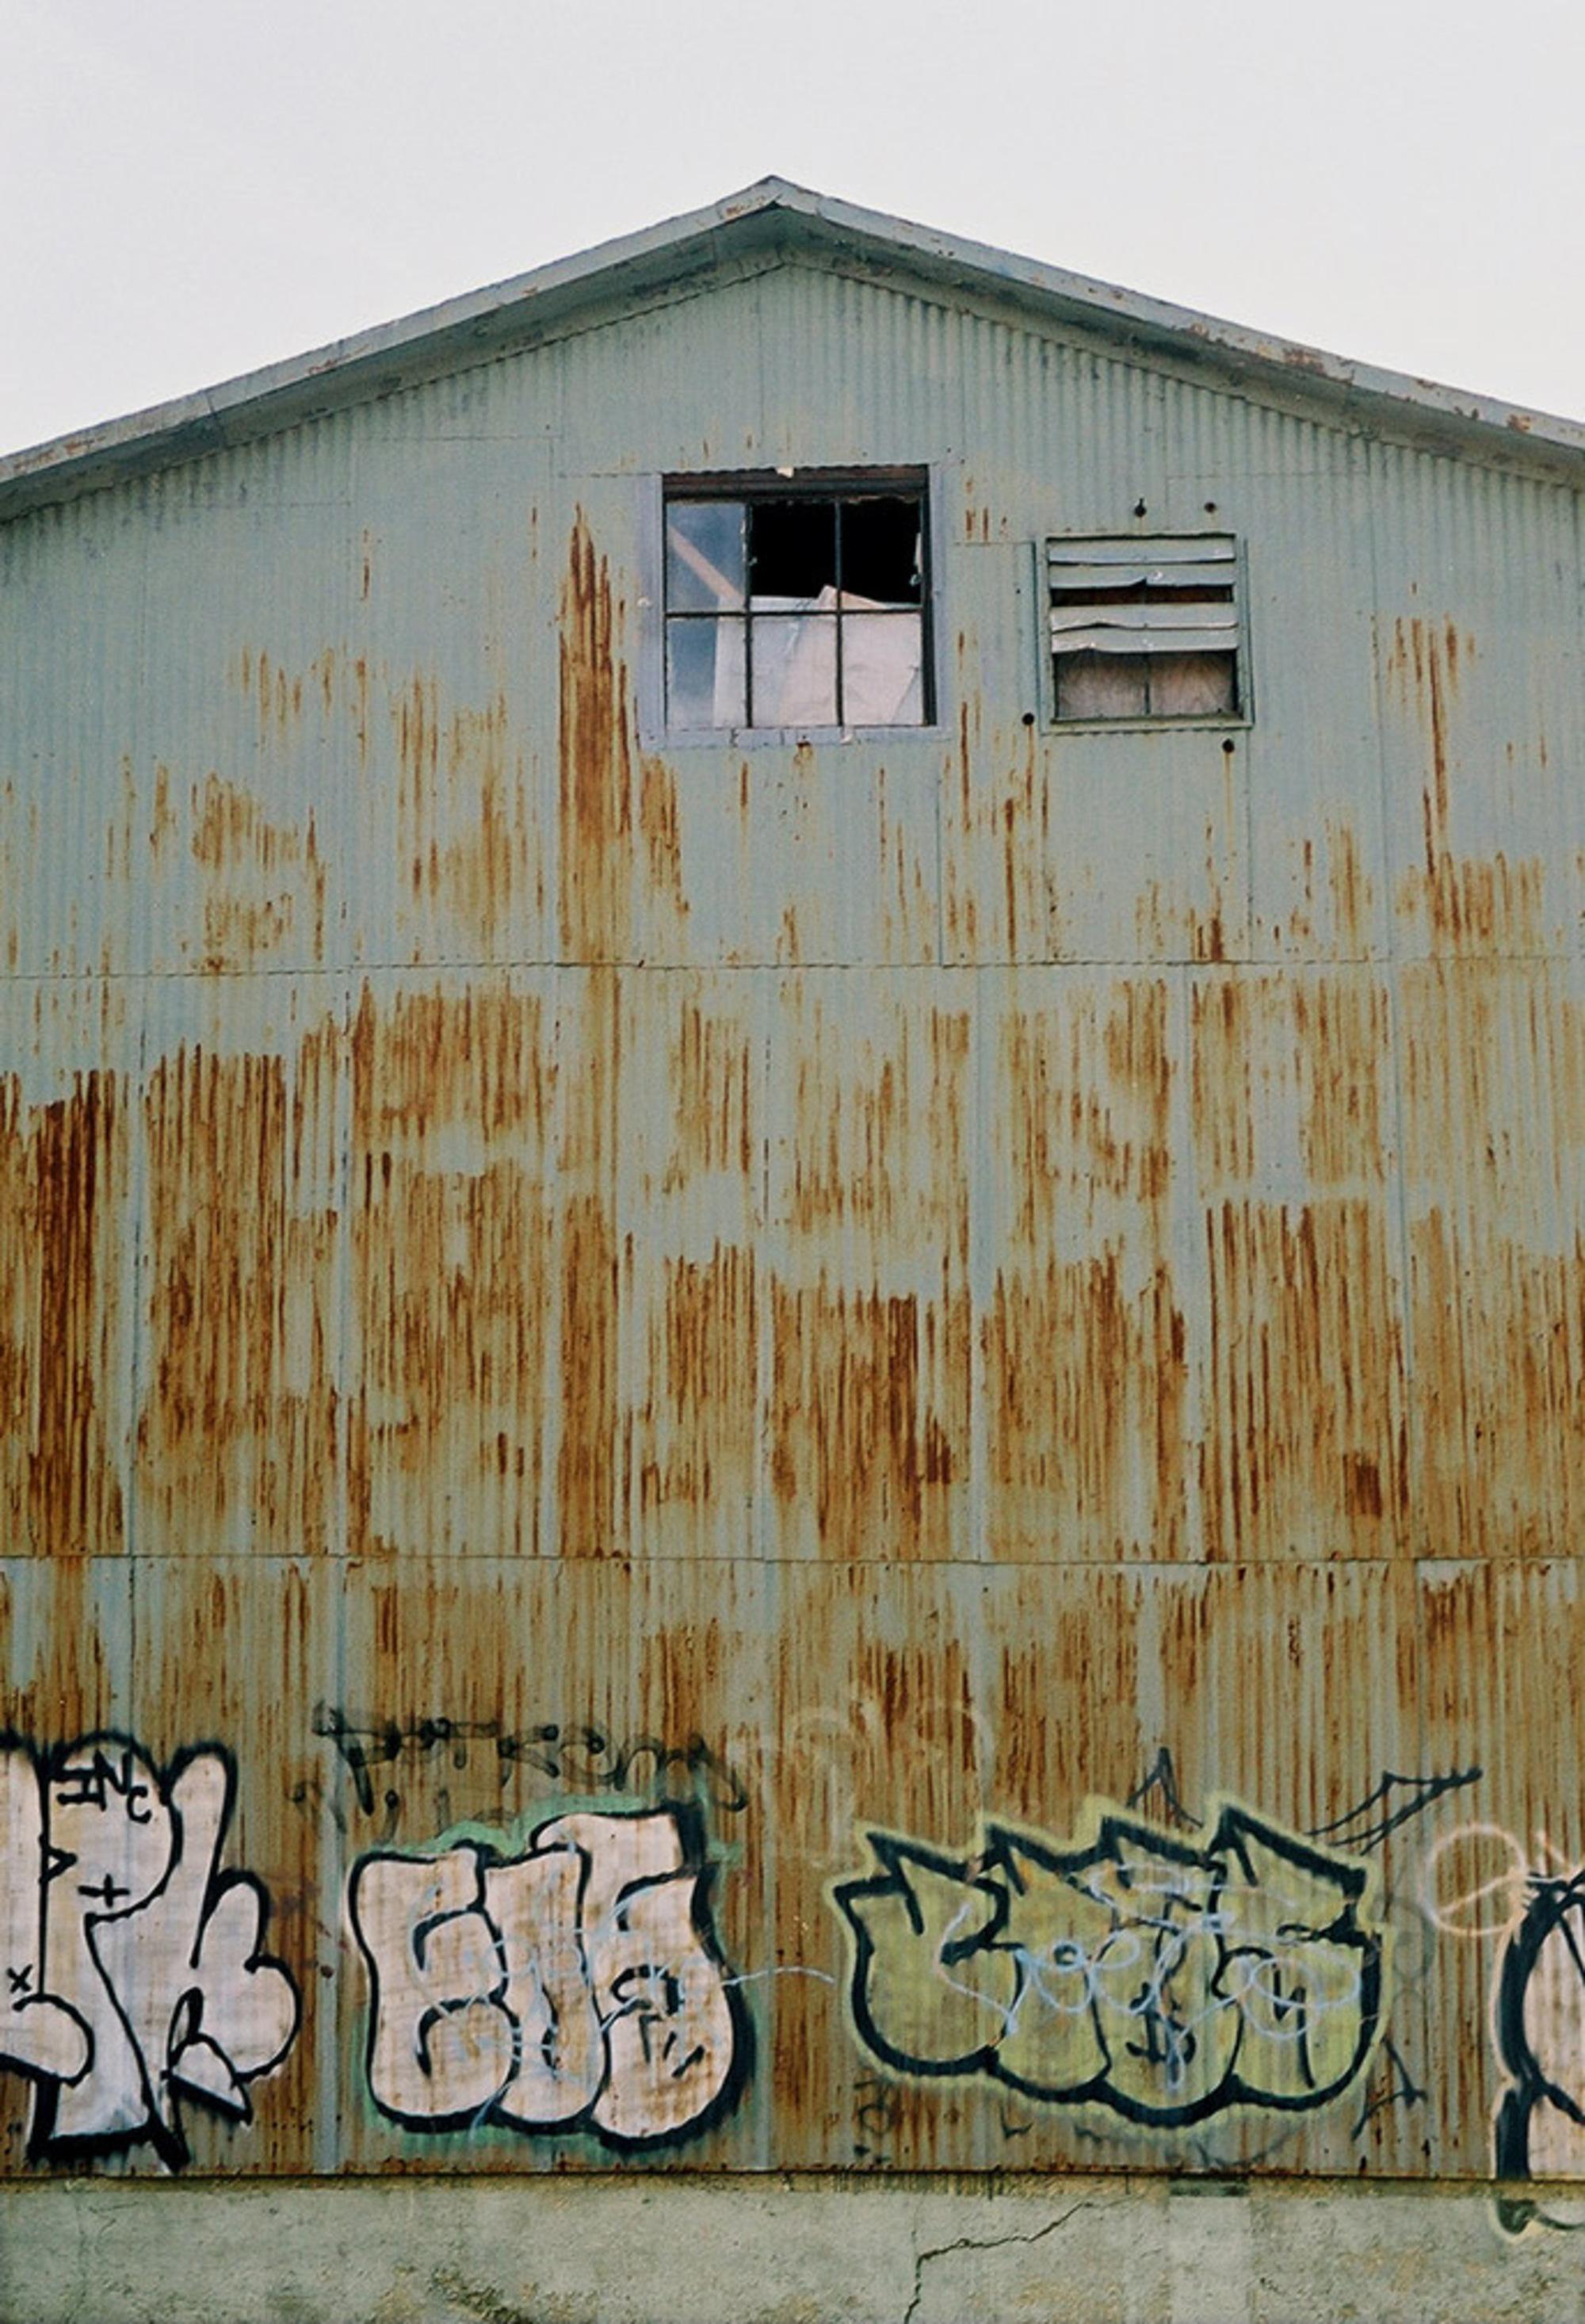 Susan Daboll Color Photograph - Williamsburg 20- Graffiti inspired Photographic Print on Paper